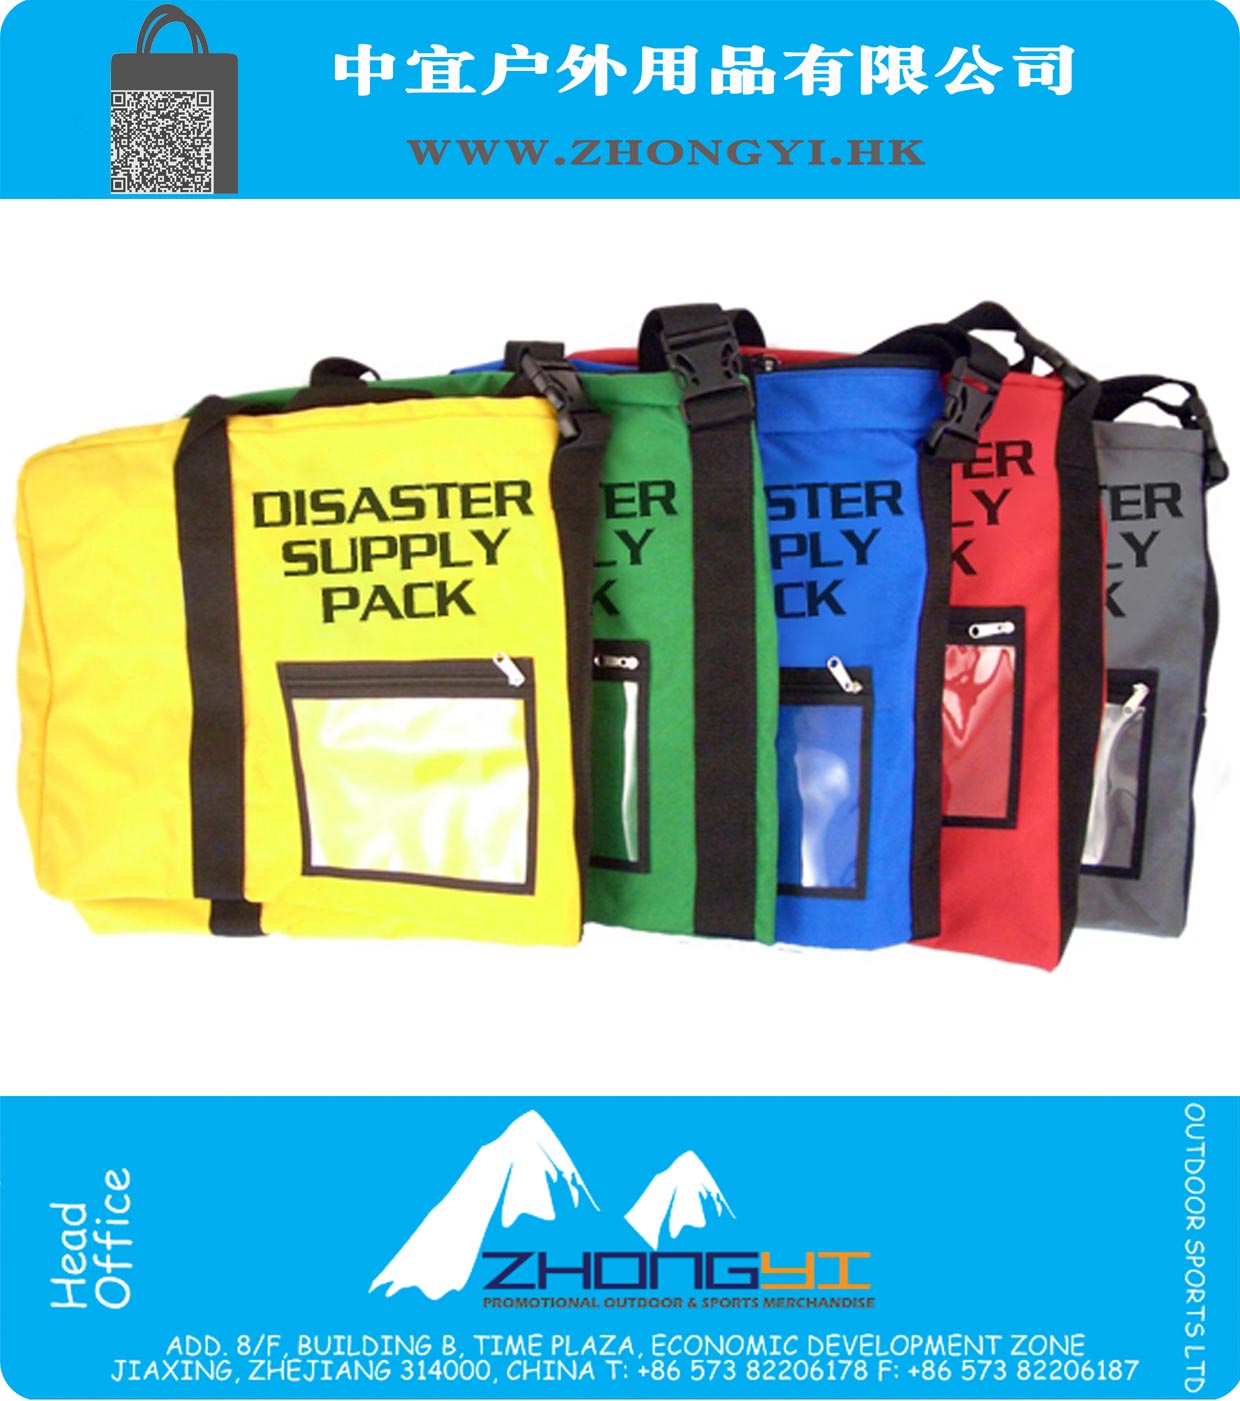 Disaster Supply Pack